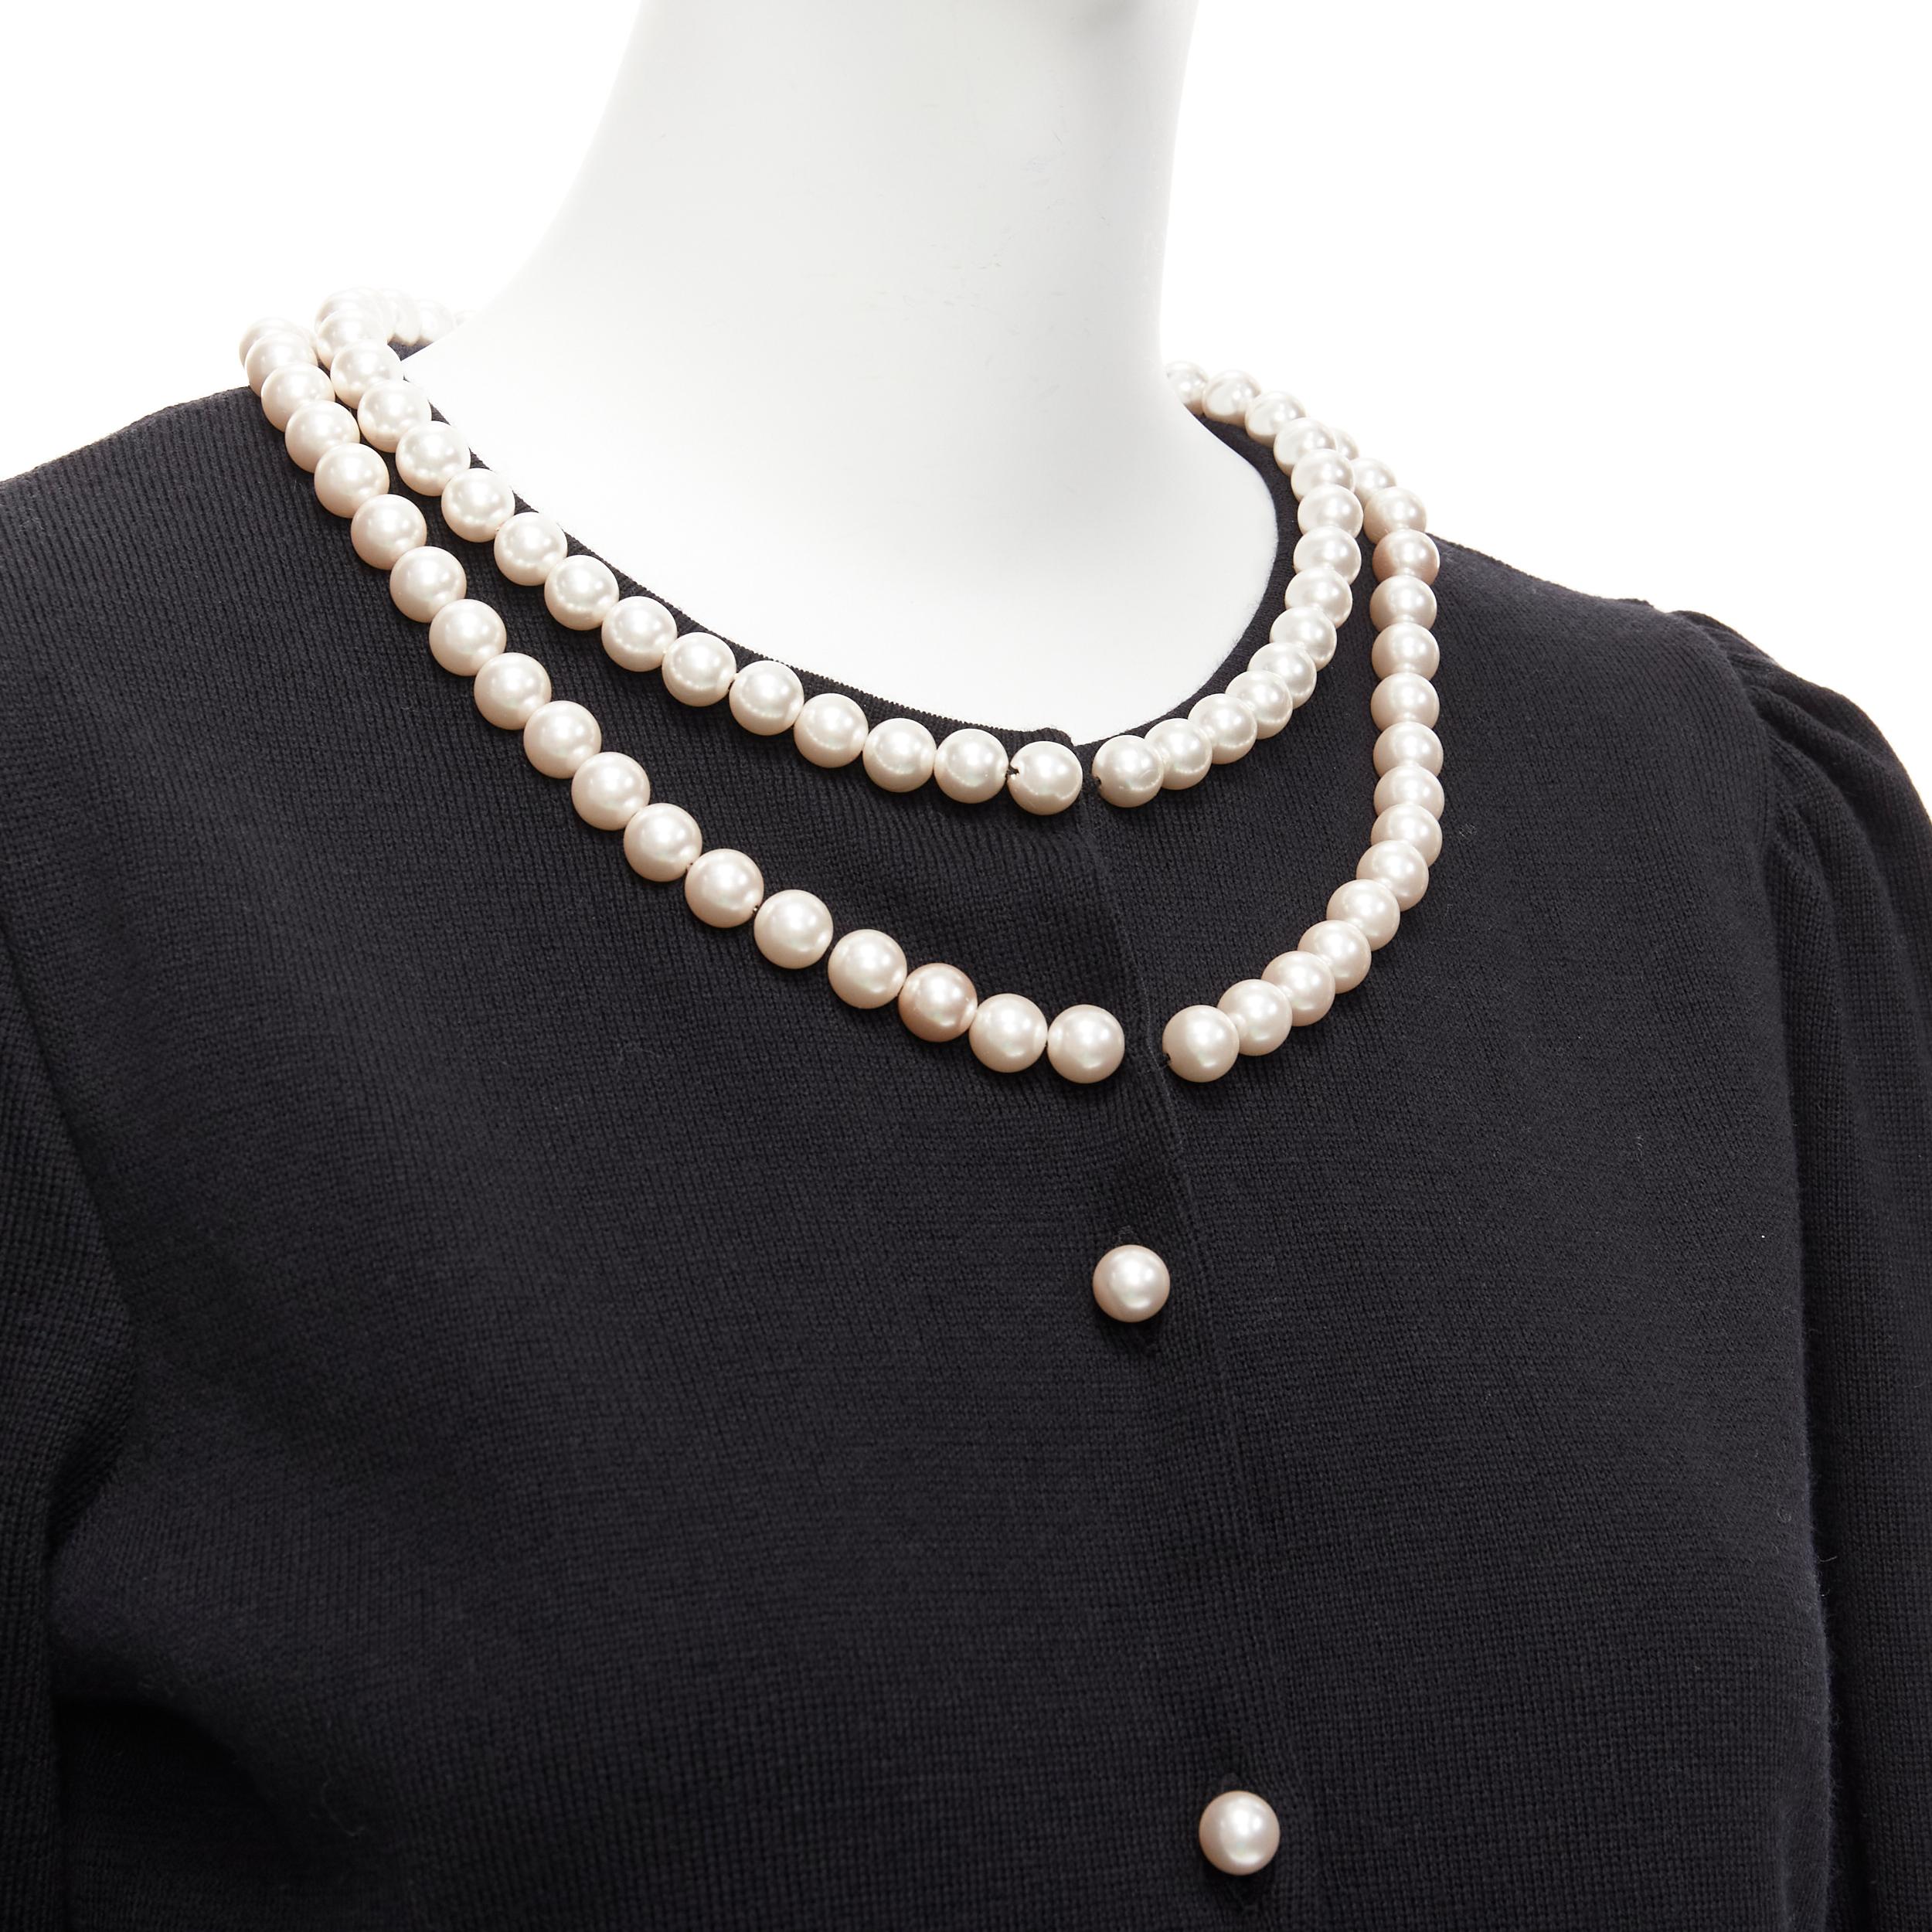 MOSCHINO pearl necklace collar black soft knit preppy cardigan IT40 S
Reference: AAWC/A01103
Brand: Moschino
Designer: Jeremy Scott
Material: Polyamide, Blend
Color: Black, Pearl
Pattern: Solid
Closure: Button
Extra Details: Faux pearl buttons.
Made